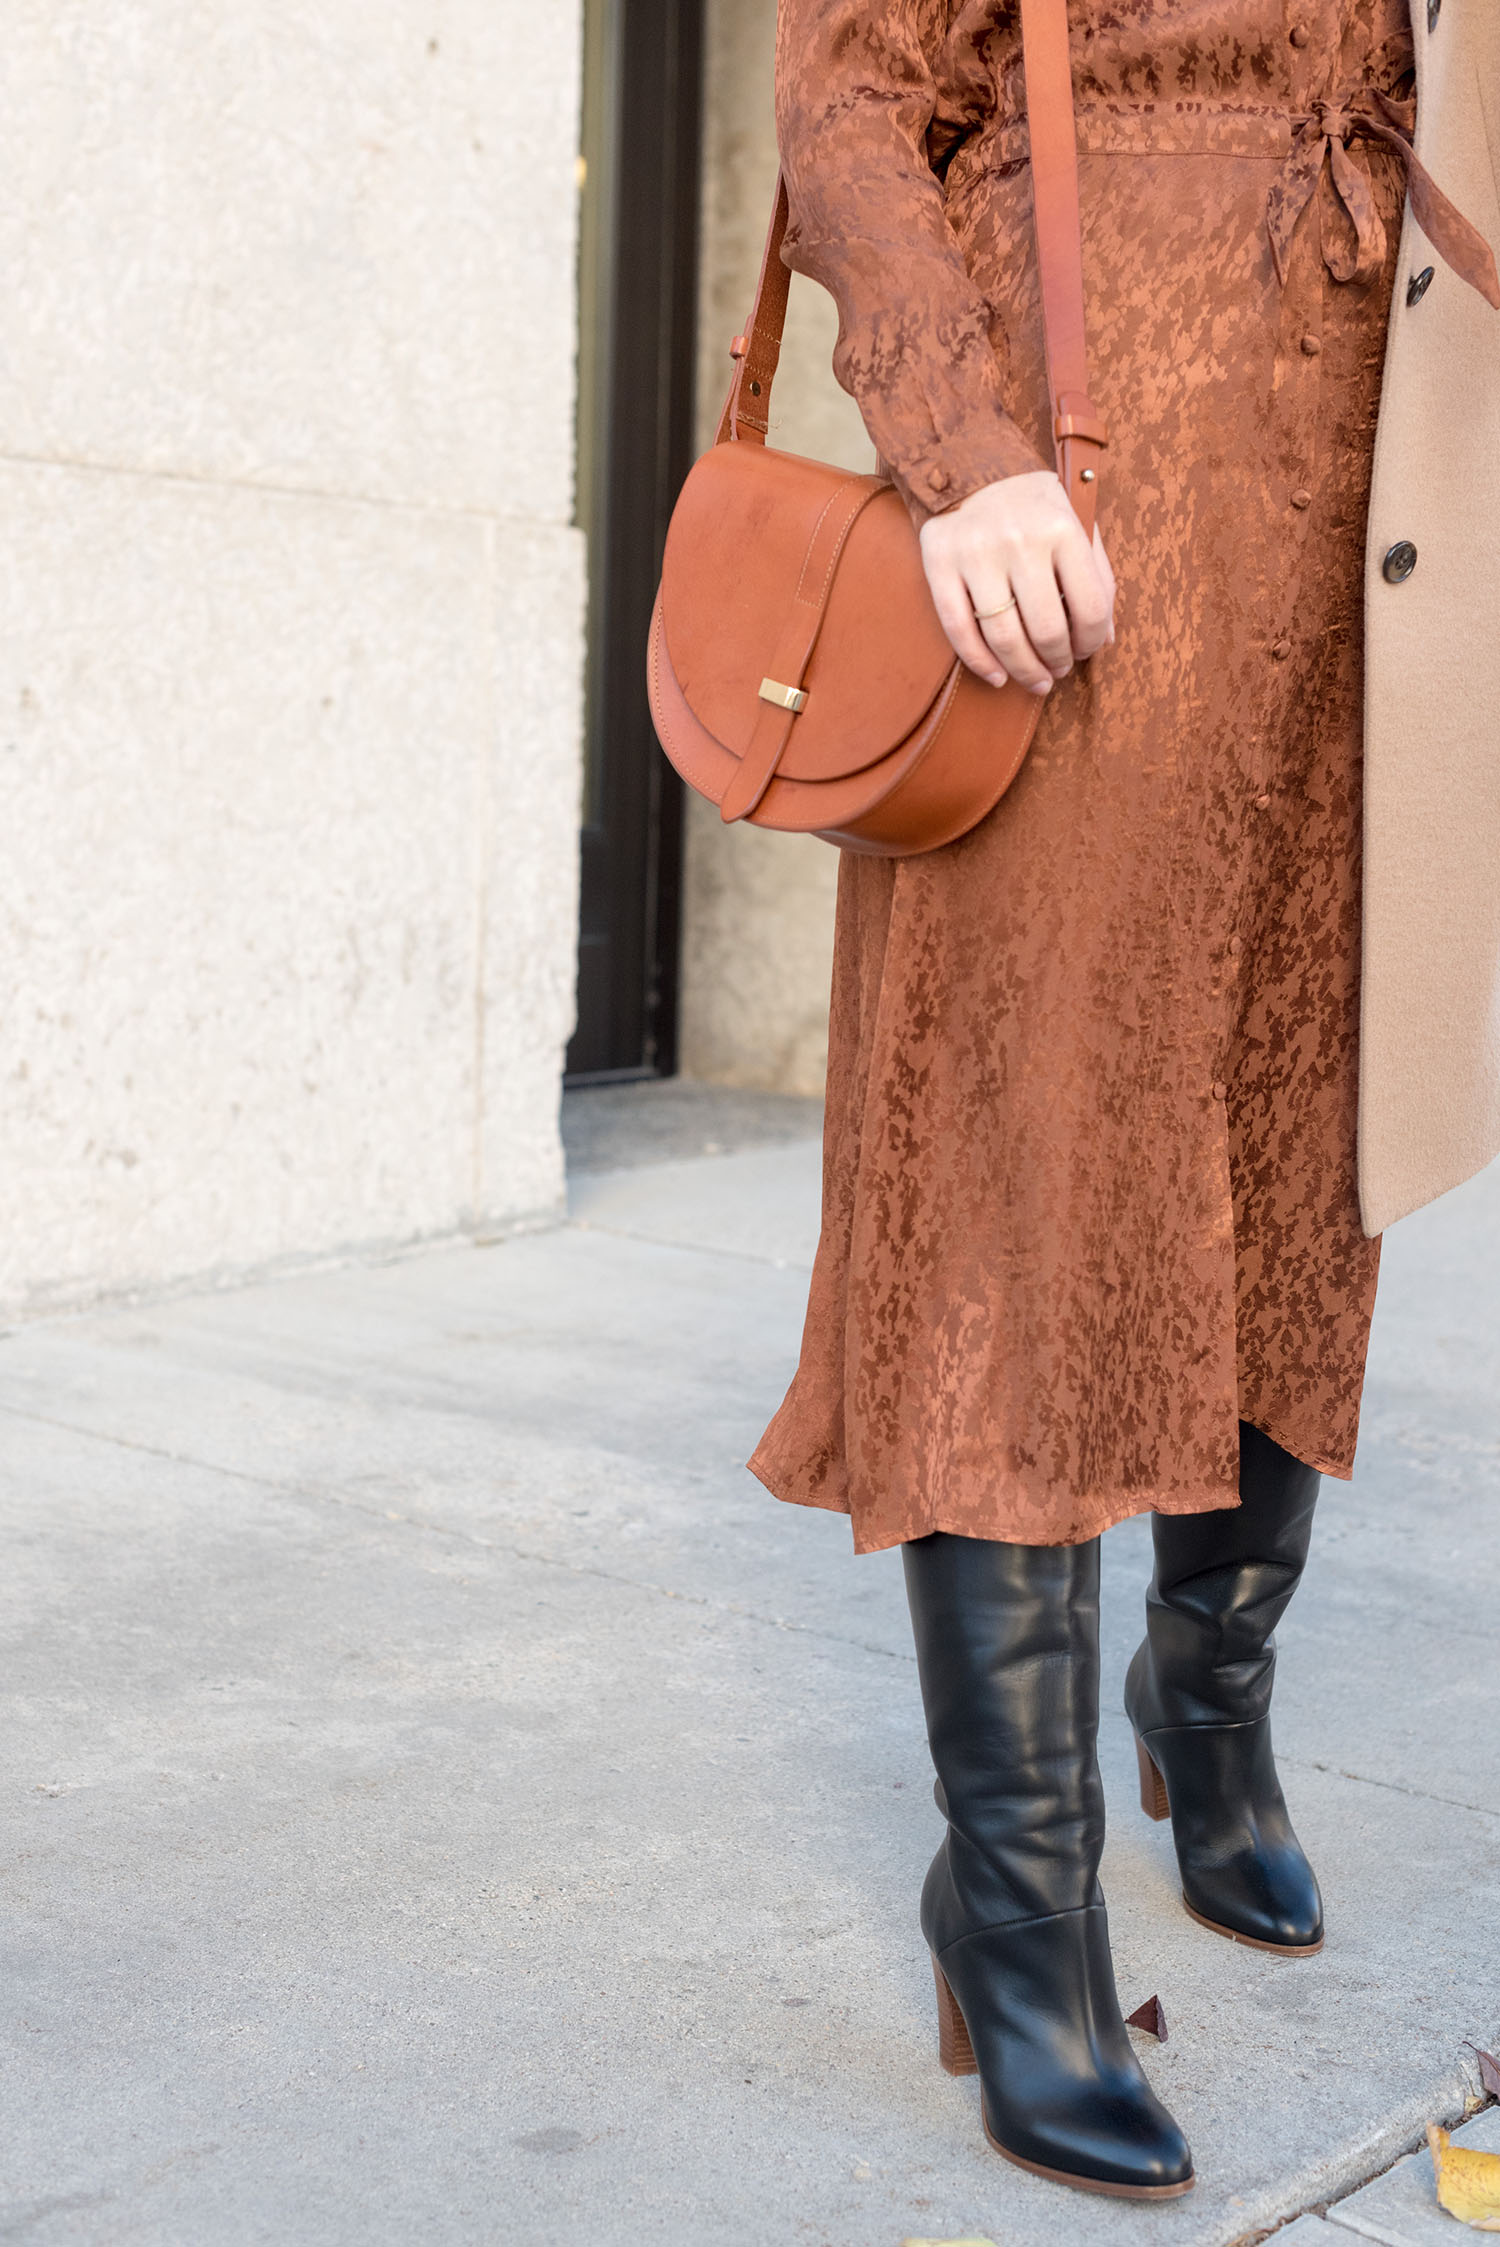 Outfit details on top Canadian fashion blogger Cee Fardoe of Coco & Vera, including a Sezane Claude bag and Uniqlo camel coat